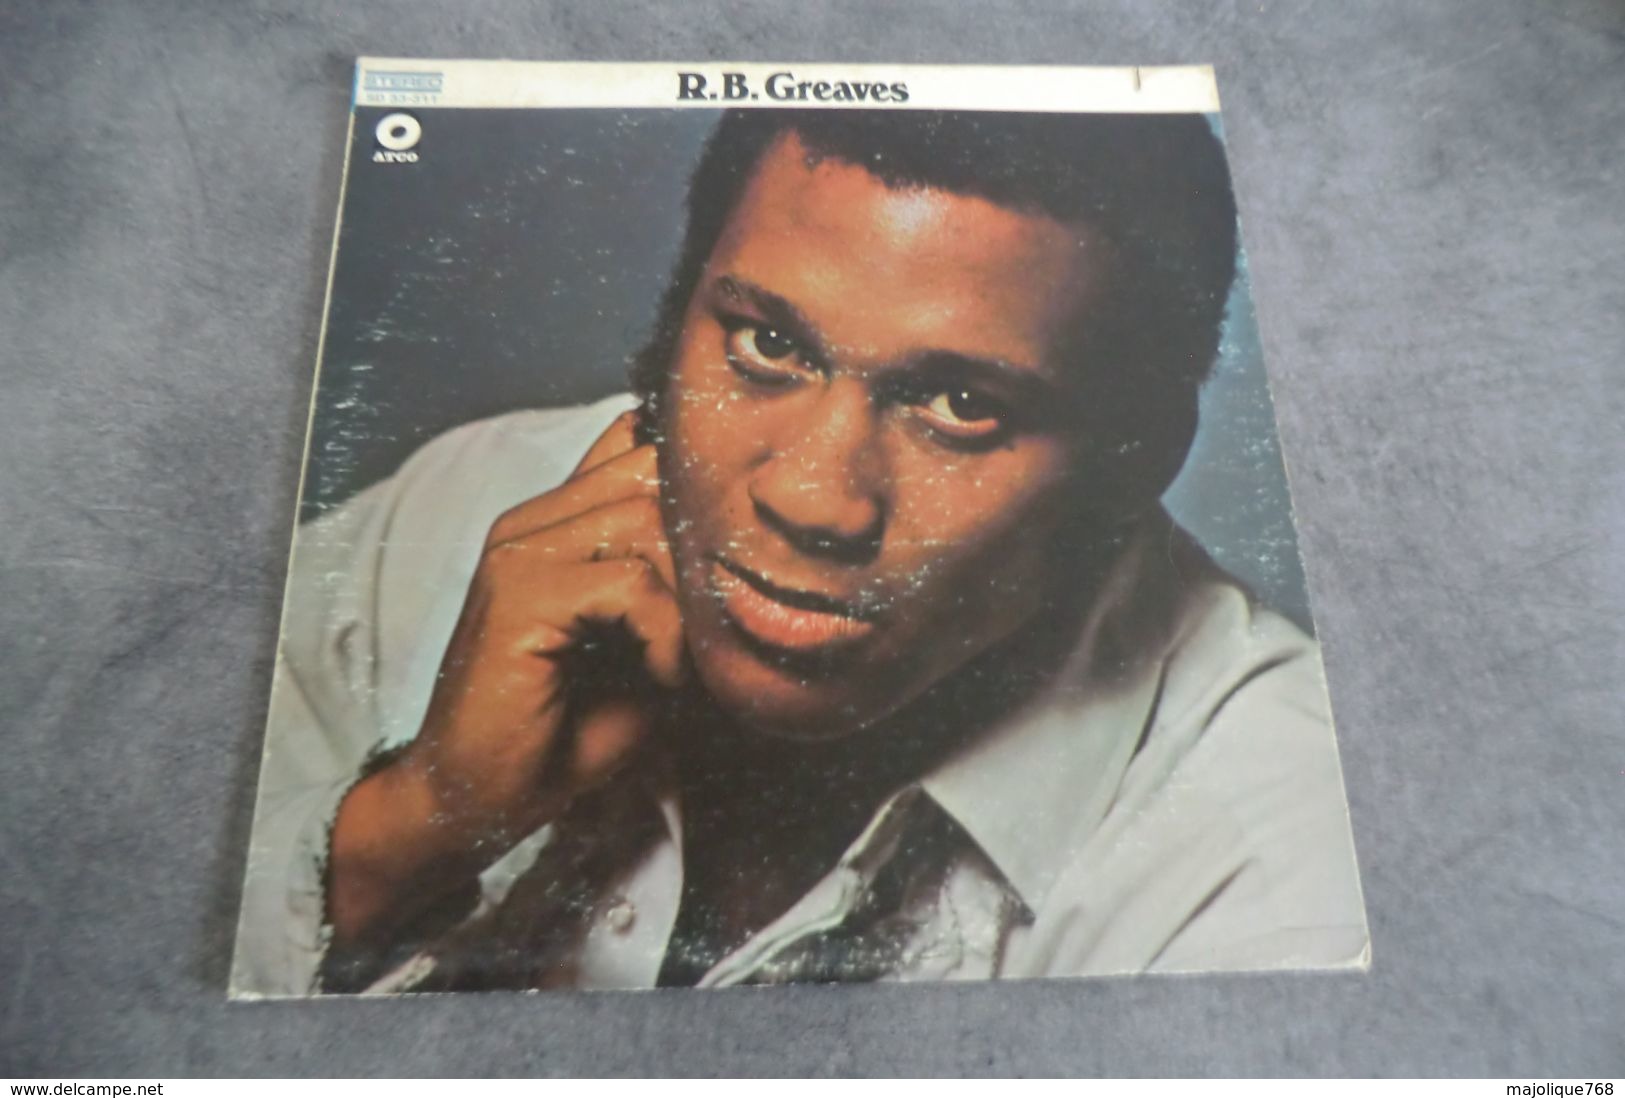 Disque - R.B. Greaves - ATCO Records Stéreo SD 33-311 - 1969 US - - Soul - R&B